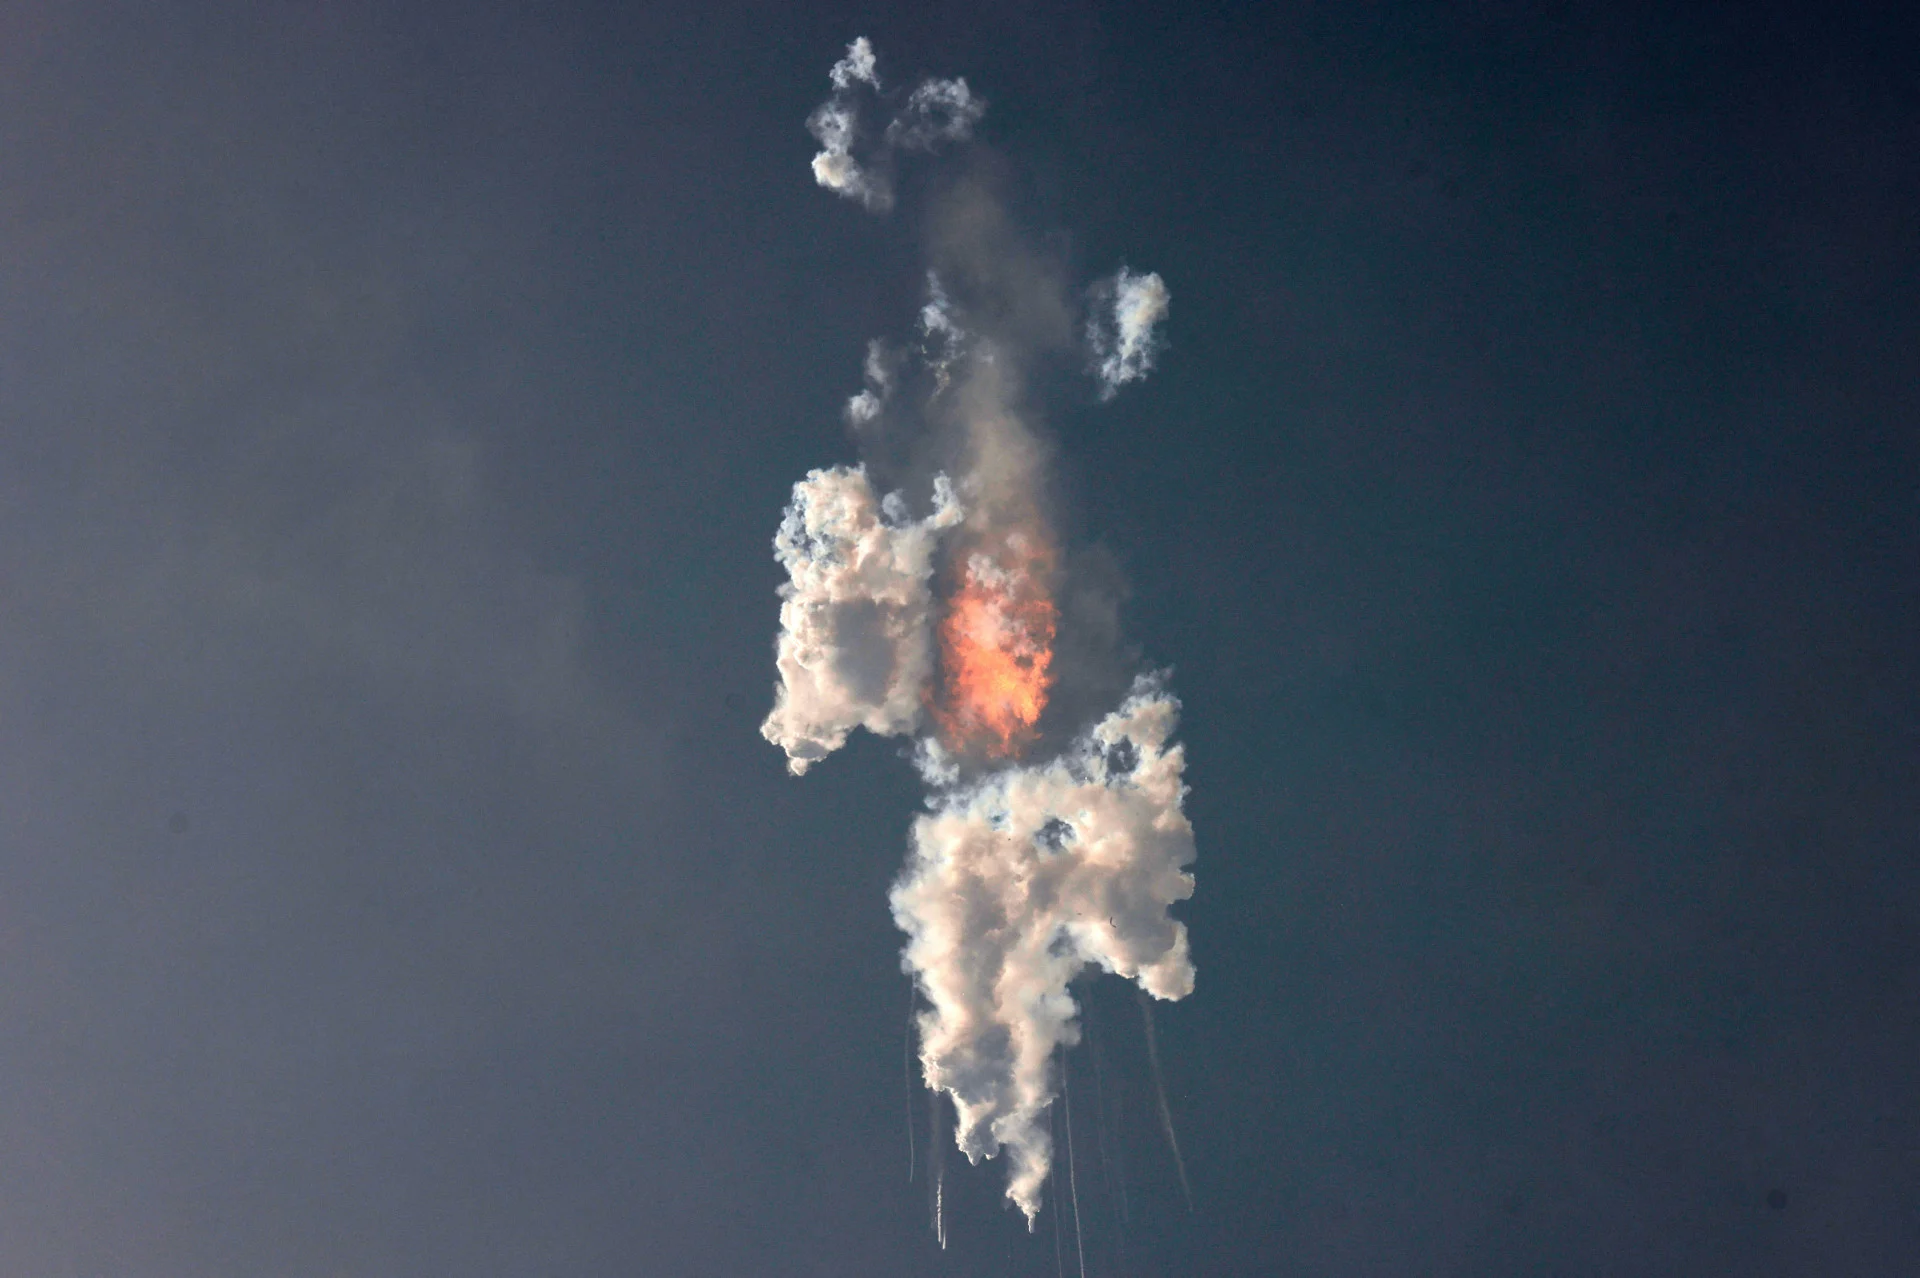 SpaceX's next-generation Starship spacecraft explodes minutes after liftoff